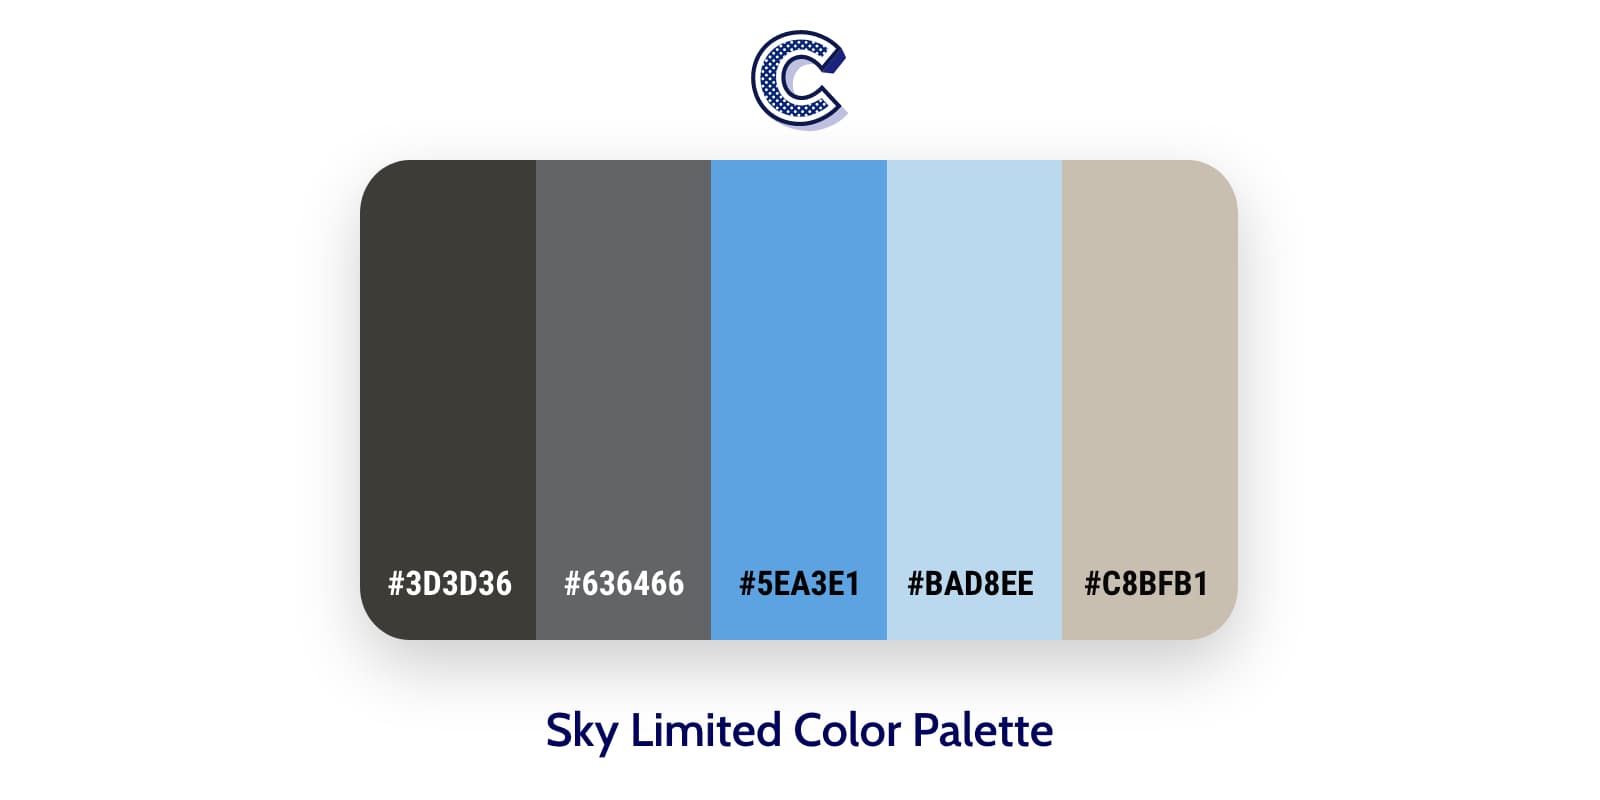 The featured Sky limited color palette